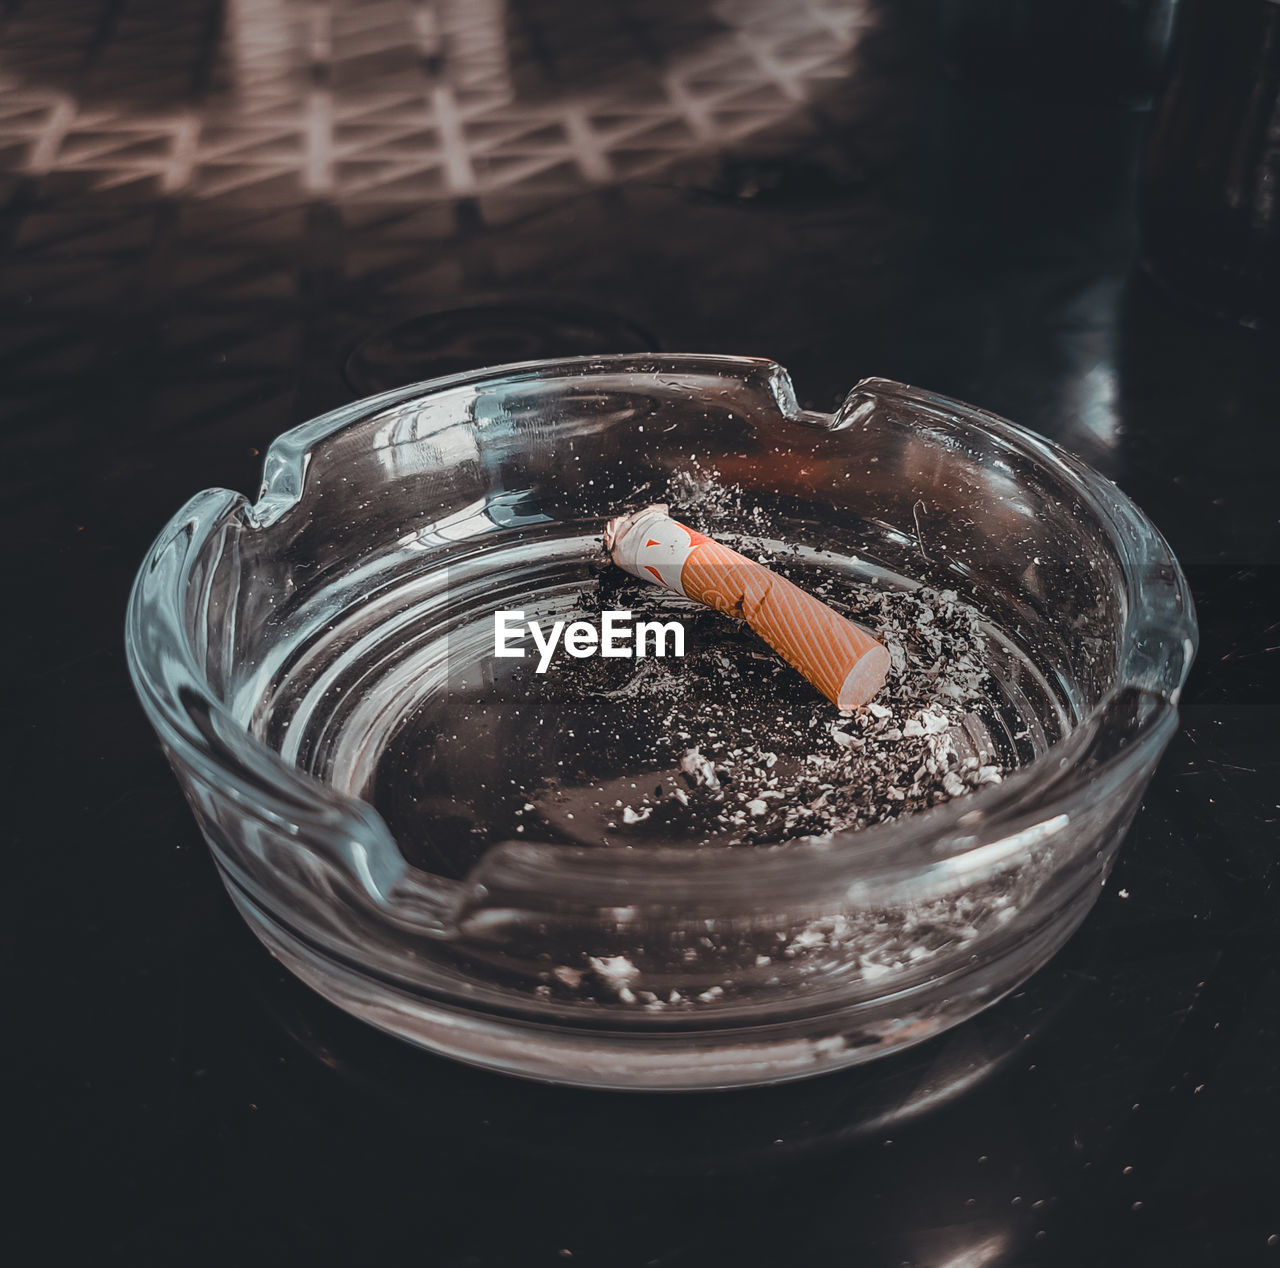 ashtray, cigarette, bad habit, social issues, smoking issues, cigarette butt, tobacco products, warning sign, no people, sign, risk, glass, indoors, ash, table, communication, burnt, close-up, smoking, container, still life, water, high angle view, smoke